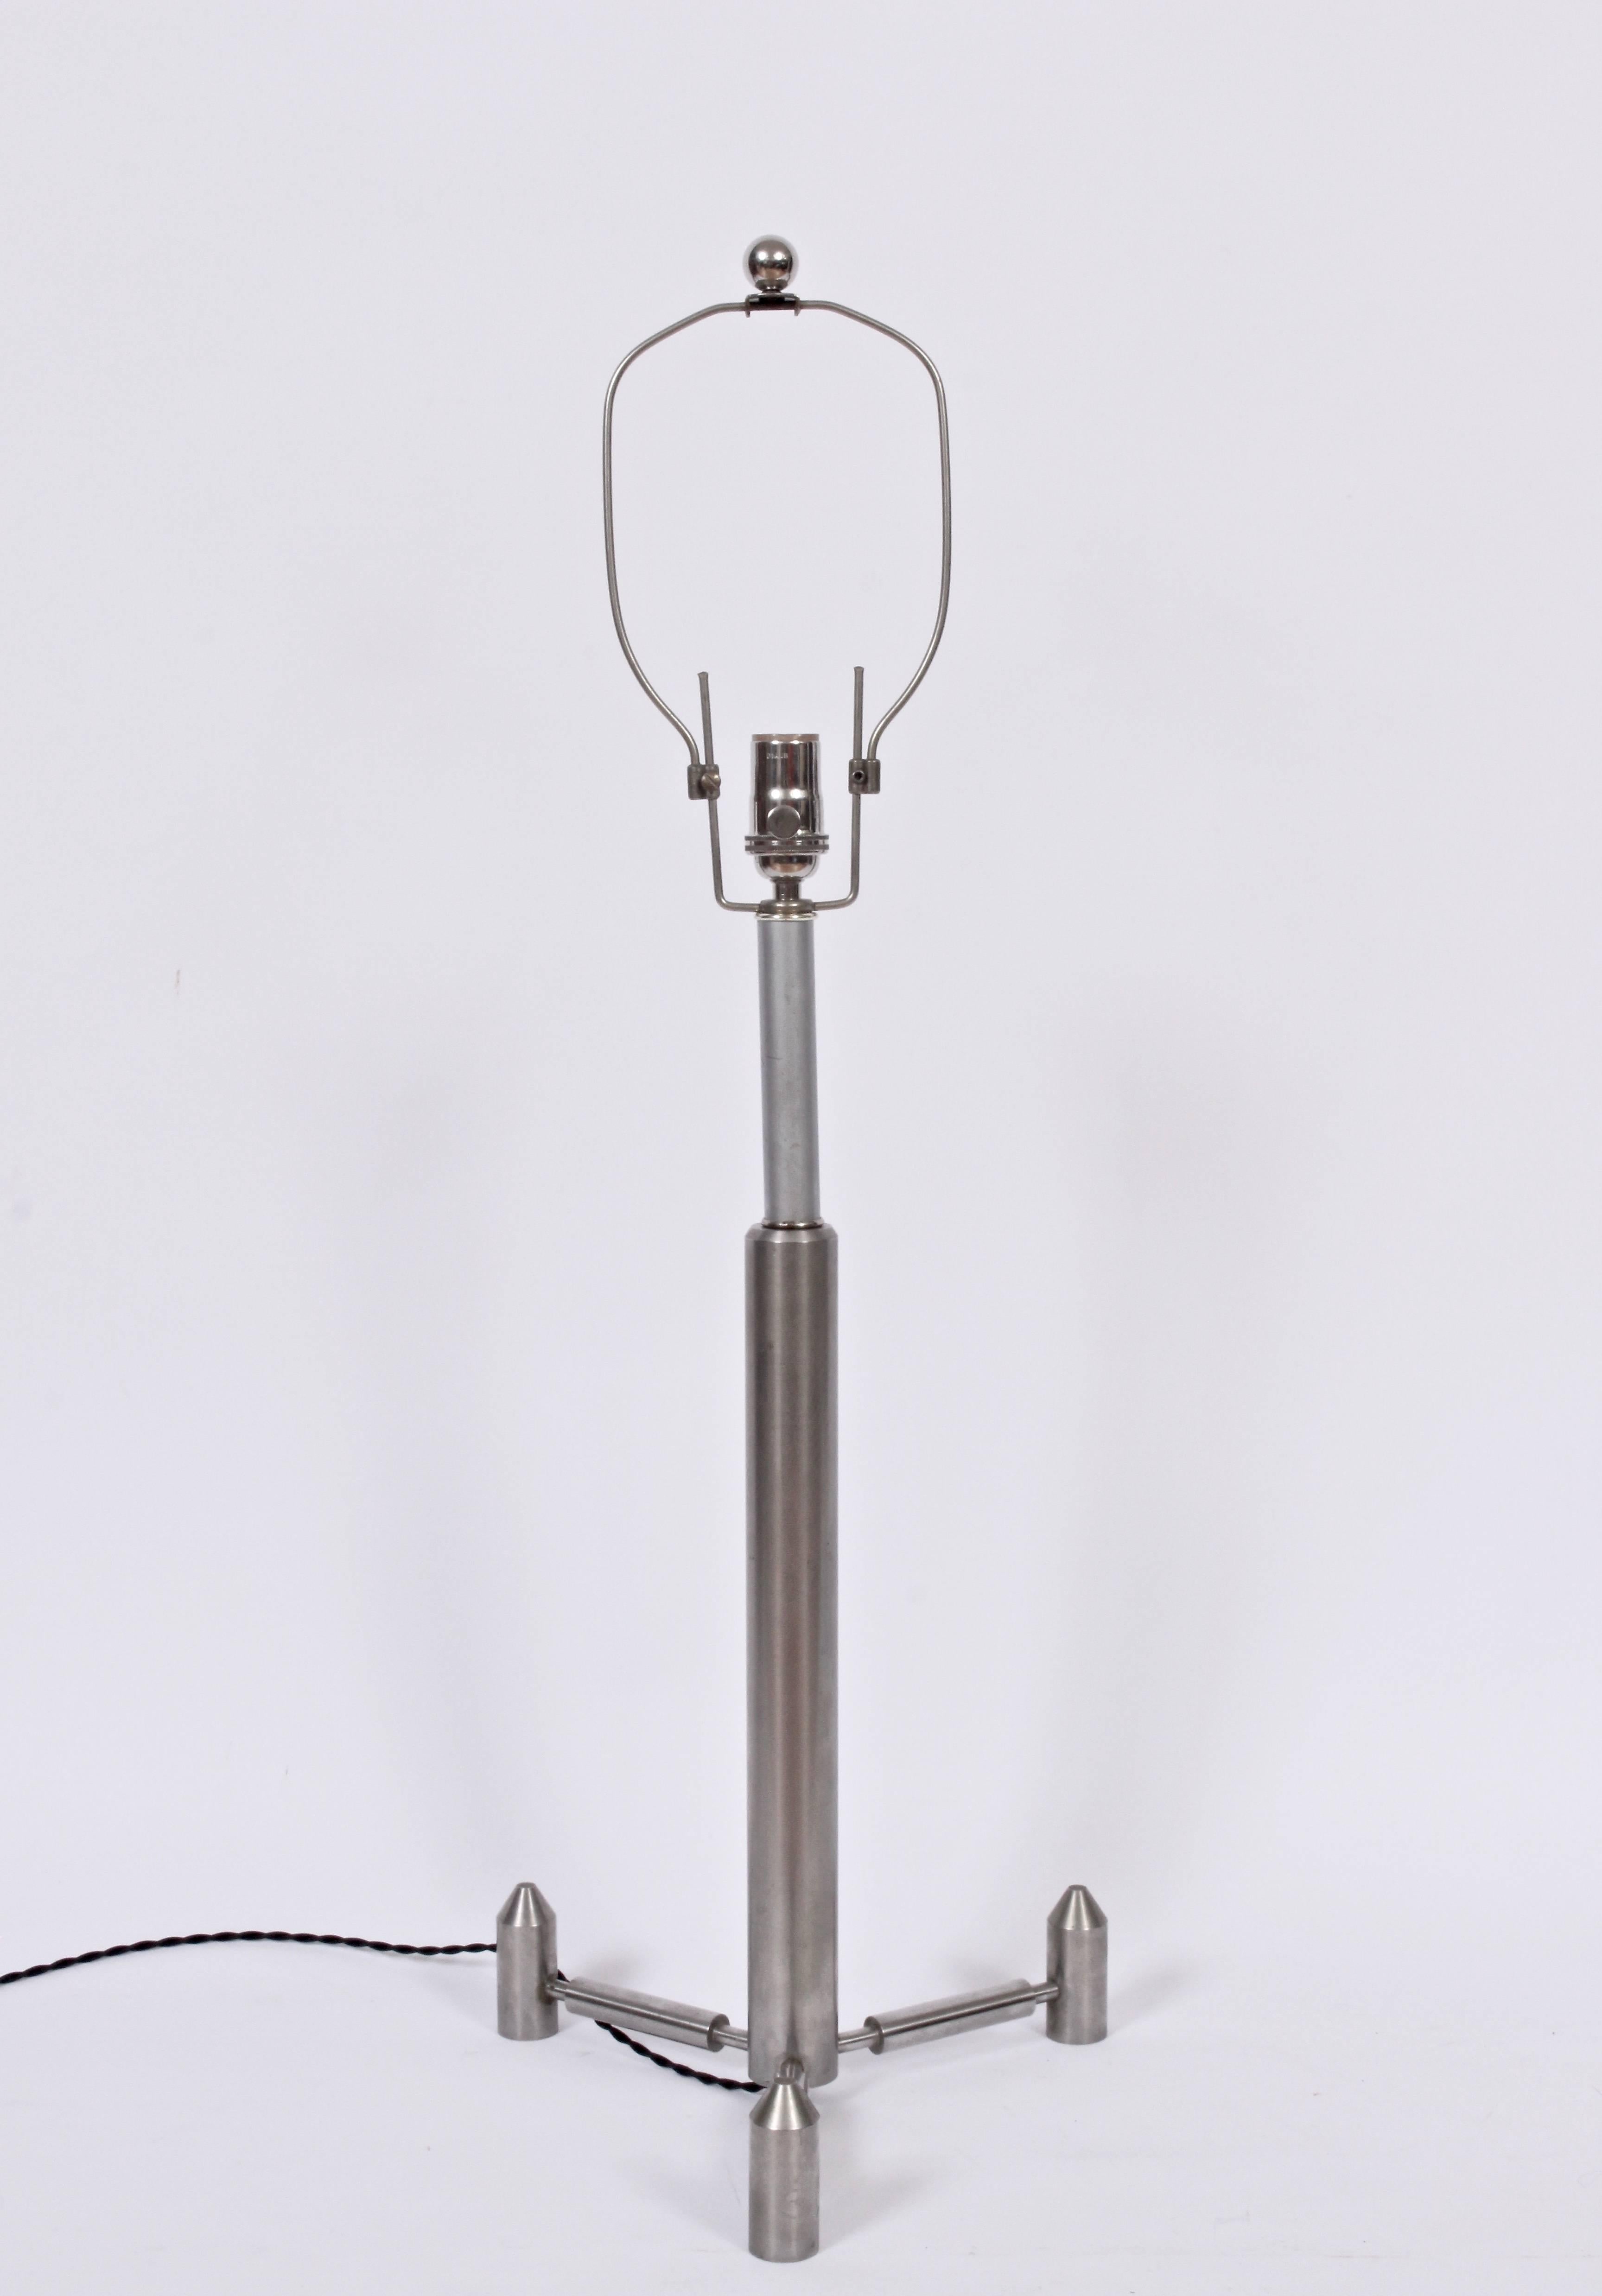 Tall Studio Machined Aeronautic Brushed Steel Table Lamp. Featuring a Tripod  handcrafted rocket form on footed Tripod base. Original adjustable harp; shifts up and down 3 inches. Harp shown in upright position. 25H to top of socket. Shade shown for